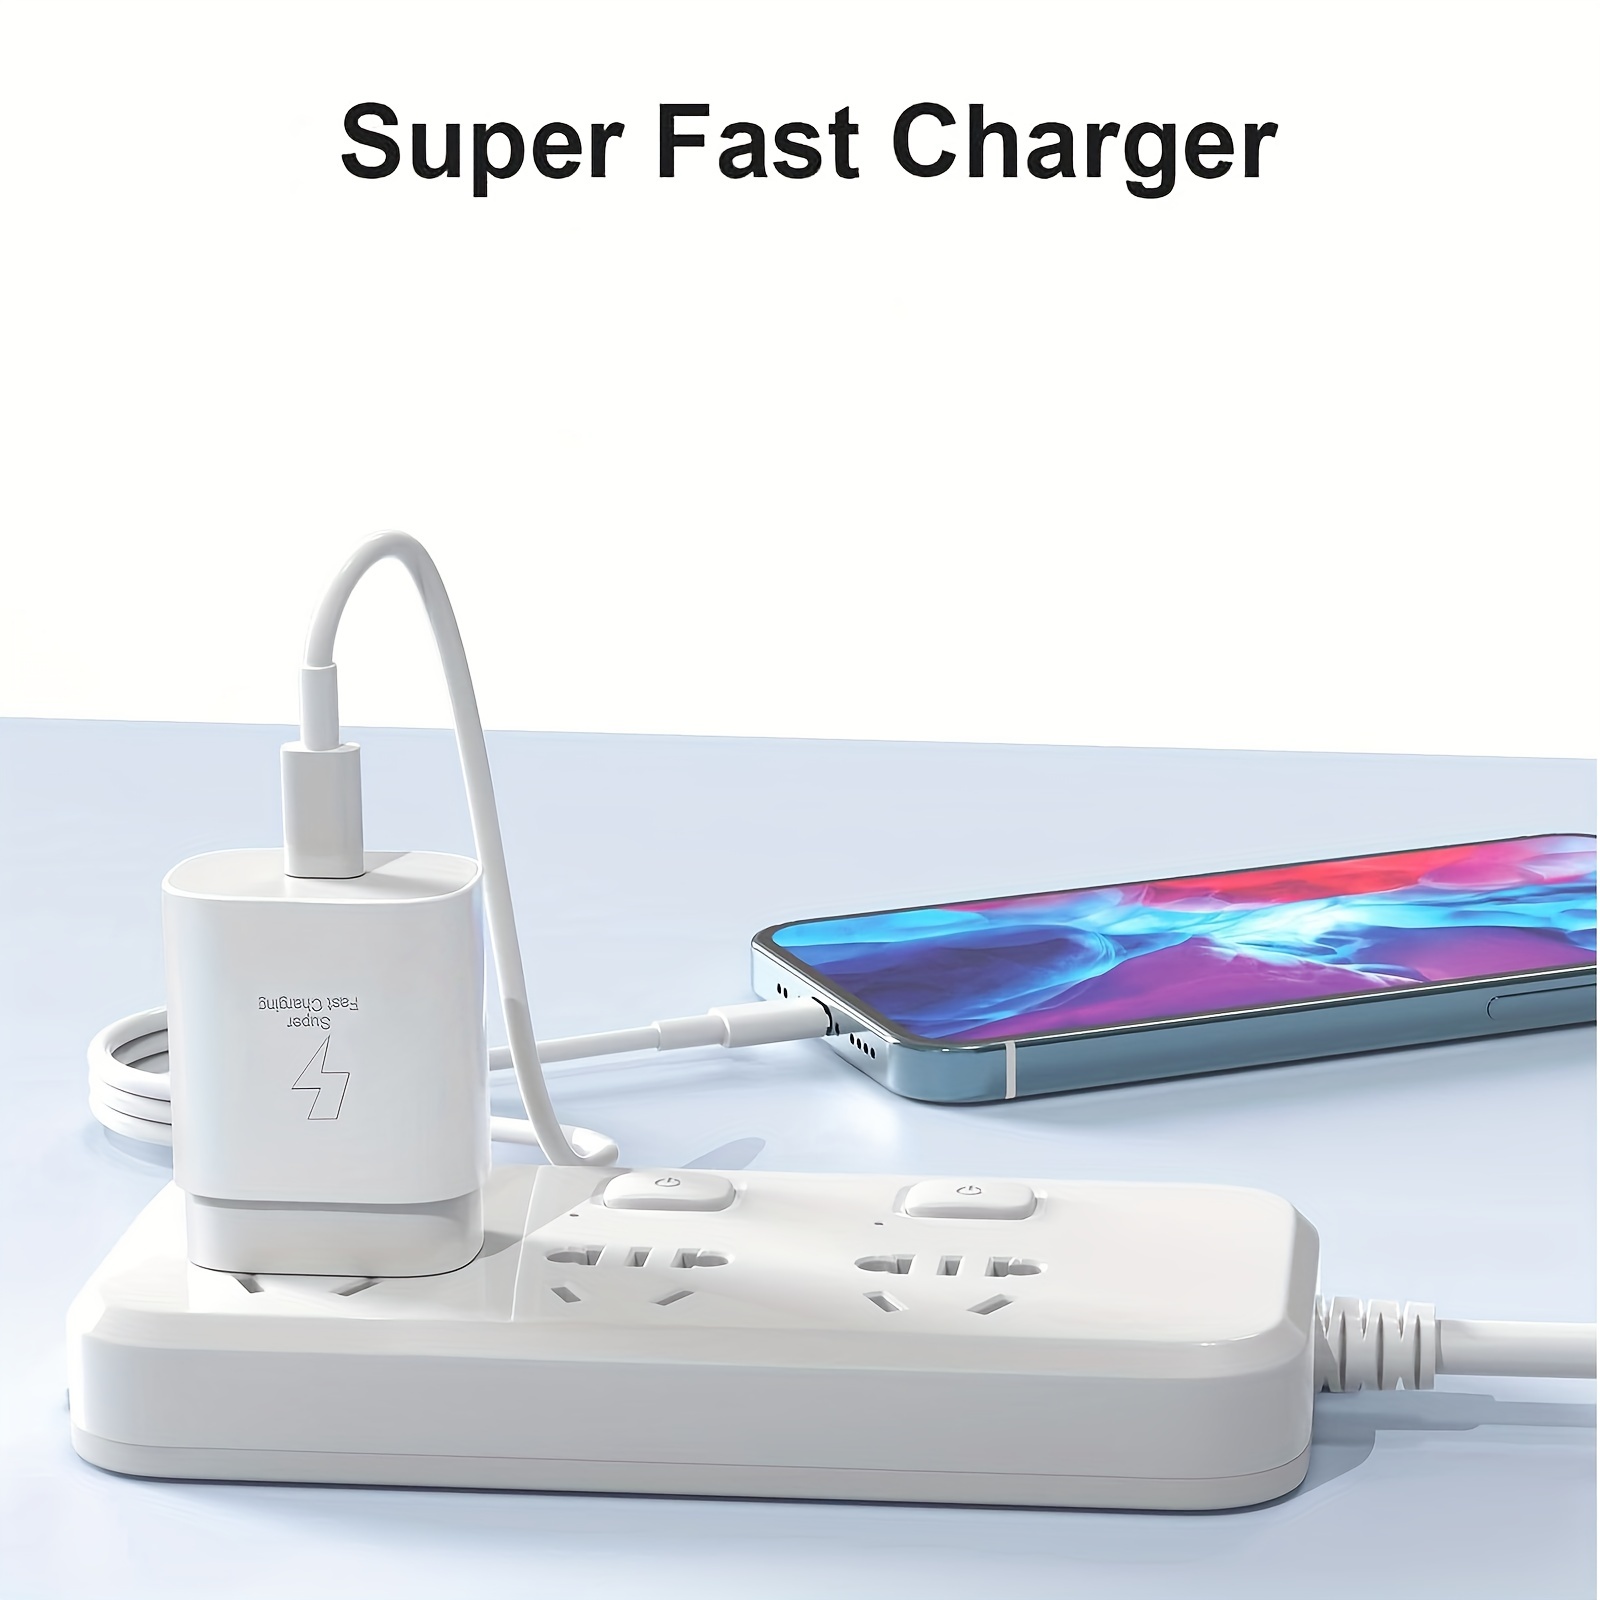 usb c charger super fast charging type c android phone charger with cable cord for samsung galaxy s23 ultra s23 s23 s22 s22 ultra s22 note 10 20 s20 s21 galaxy tab s7 s8 details 6